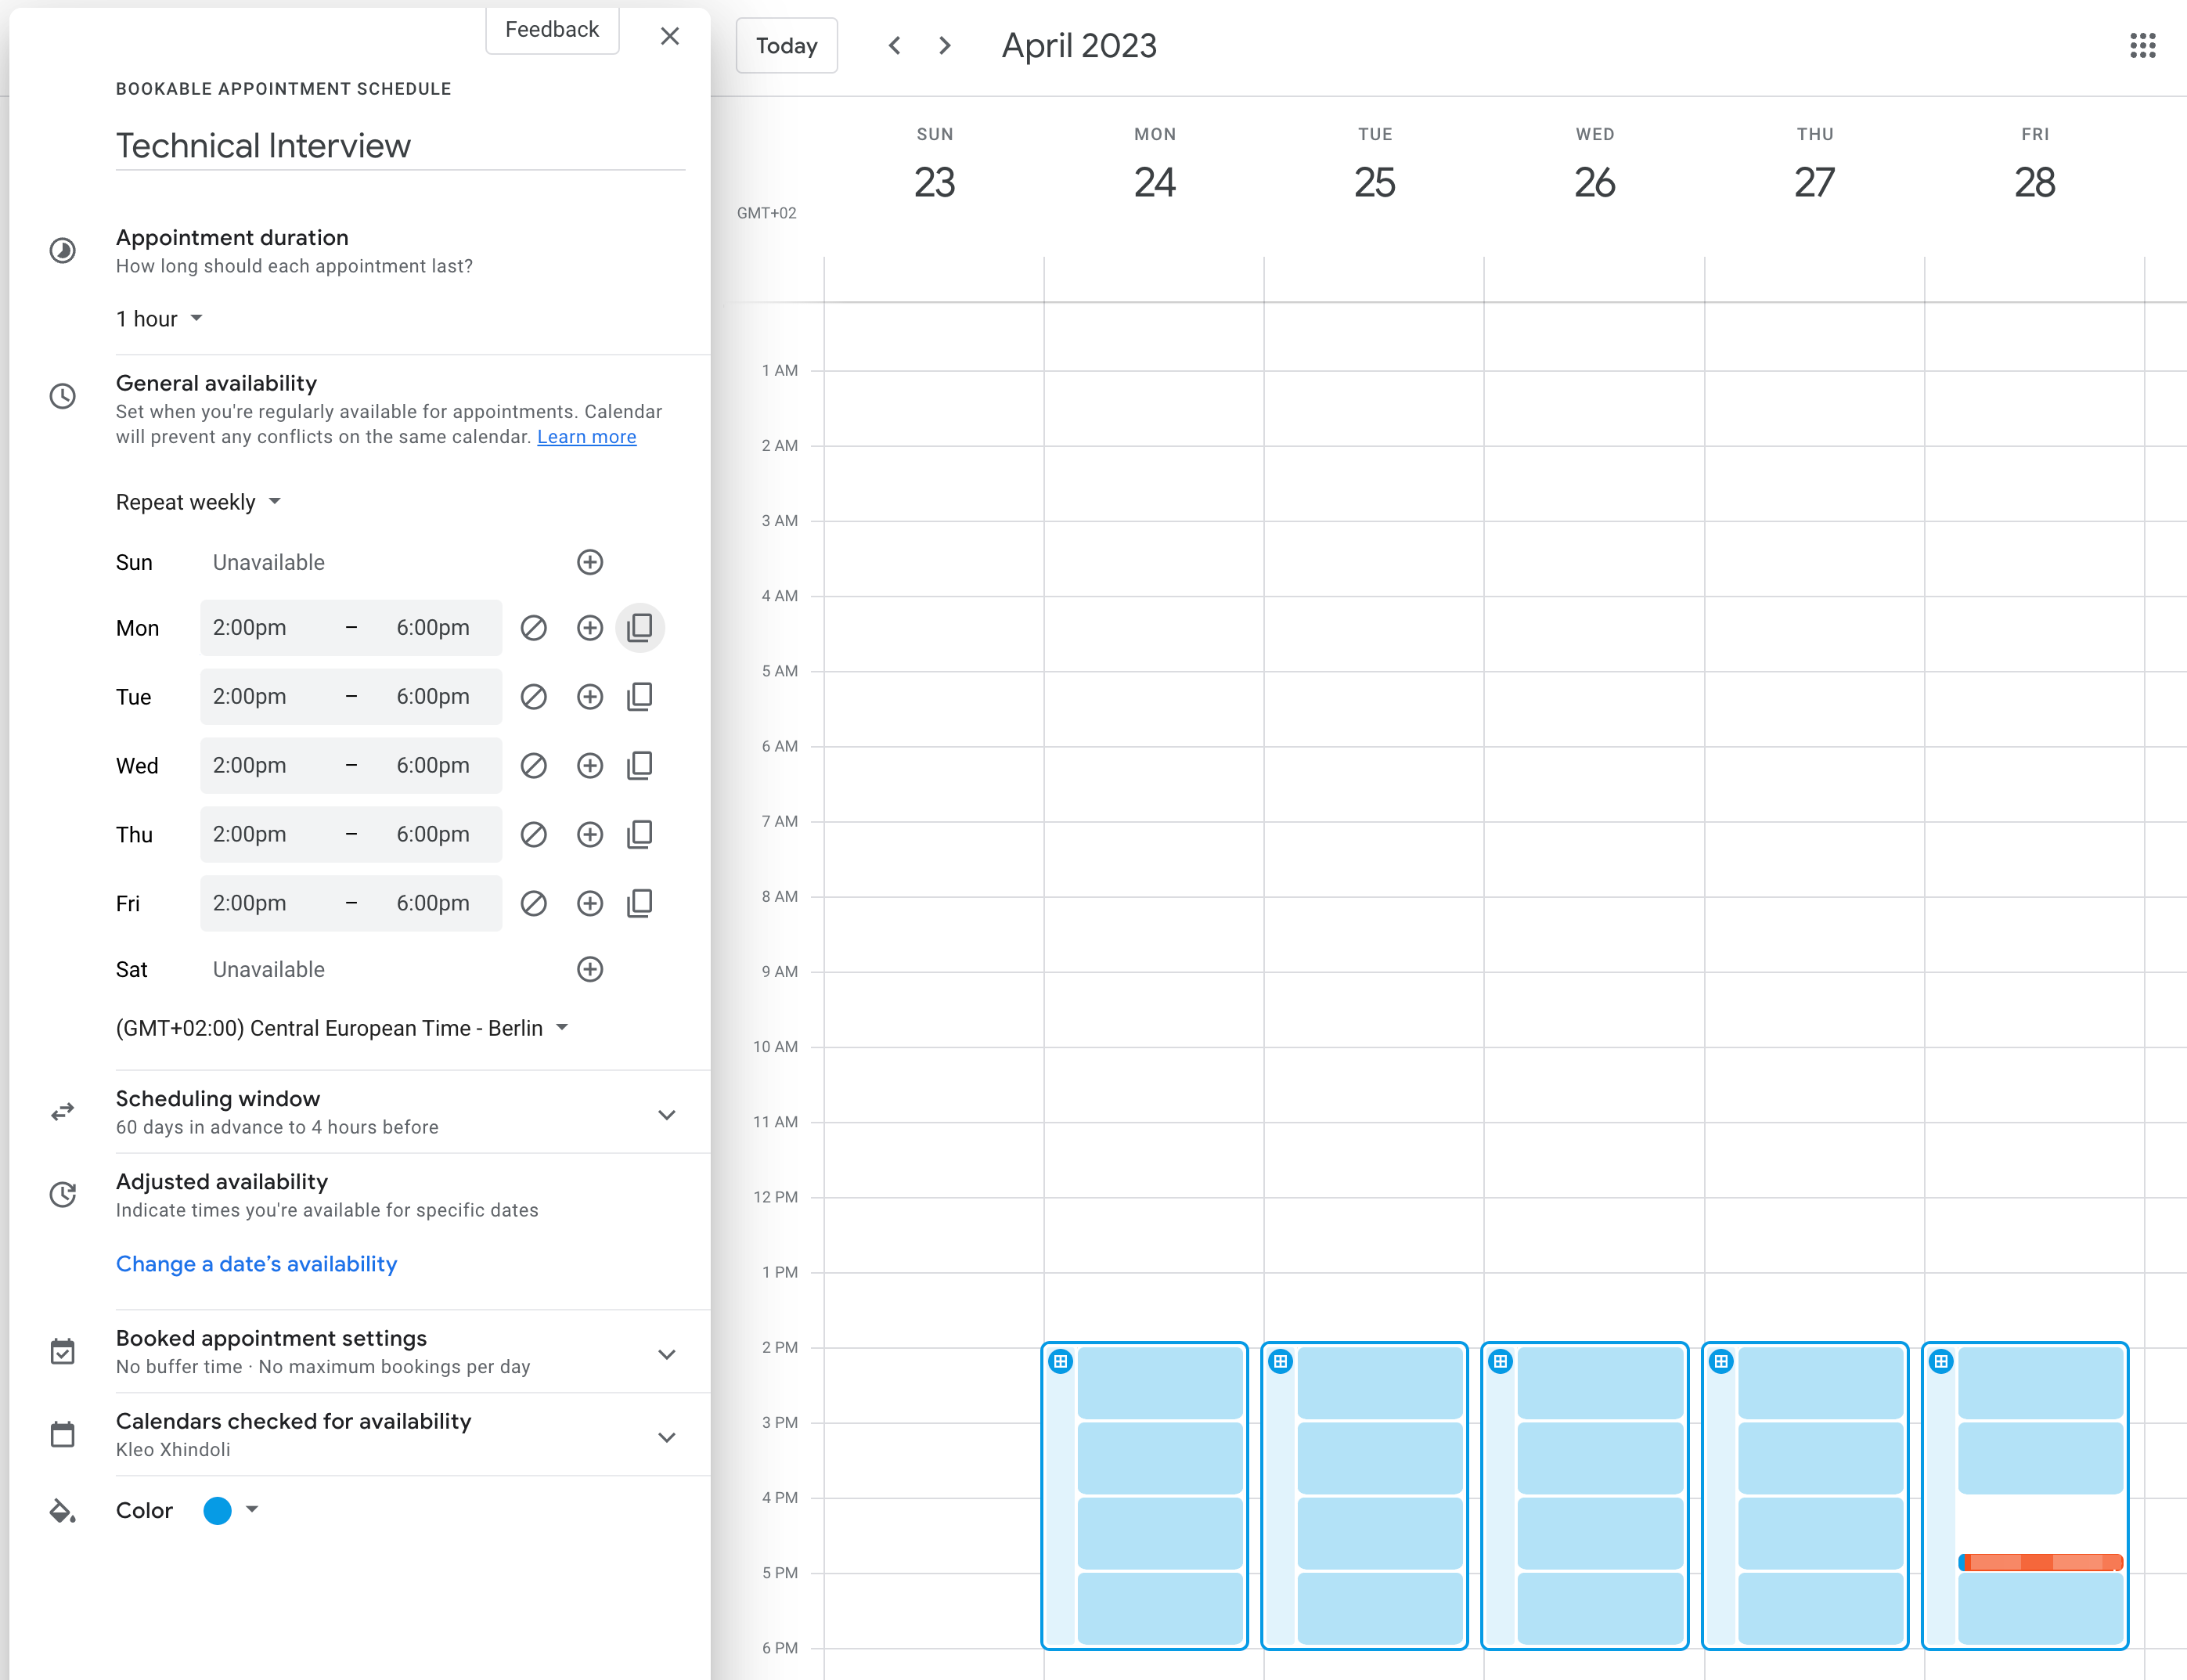 How to Use the Google Calendar Appointment Schedule For Free